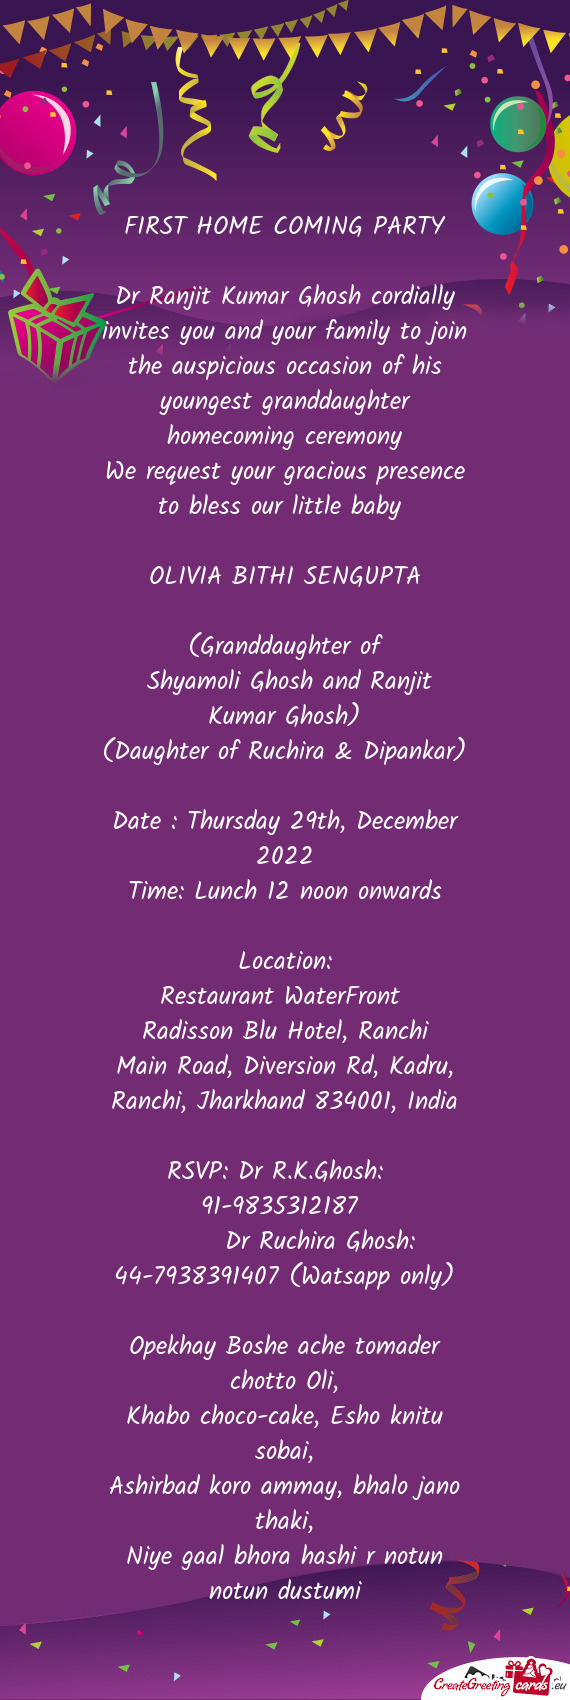 Dr Ranjit Kumar Ghosh cordially invites you and your family to join the auspicious occasion of his y